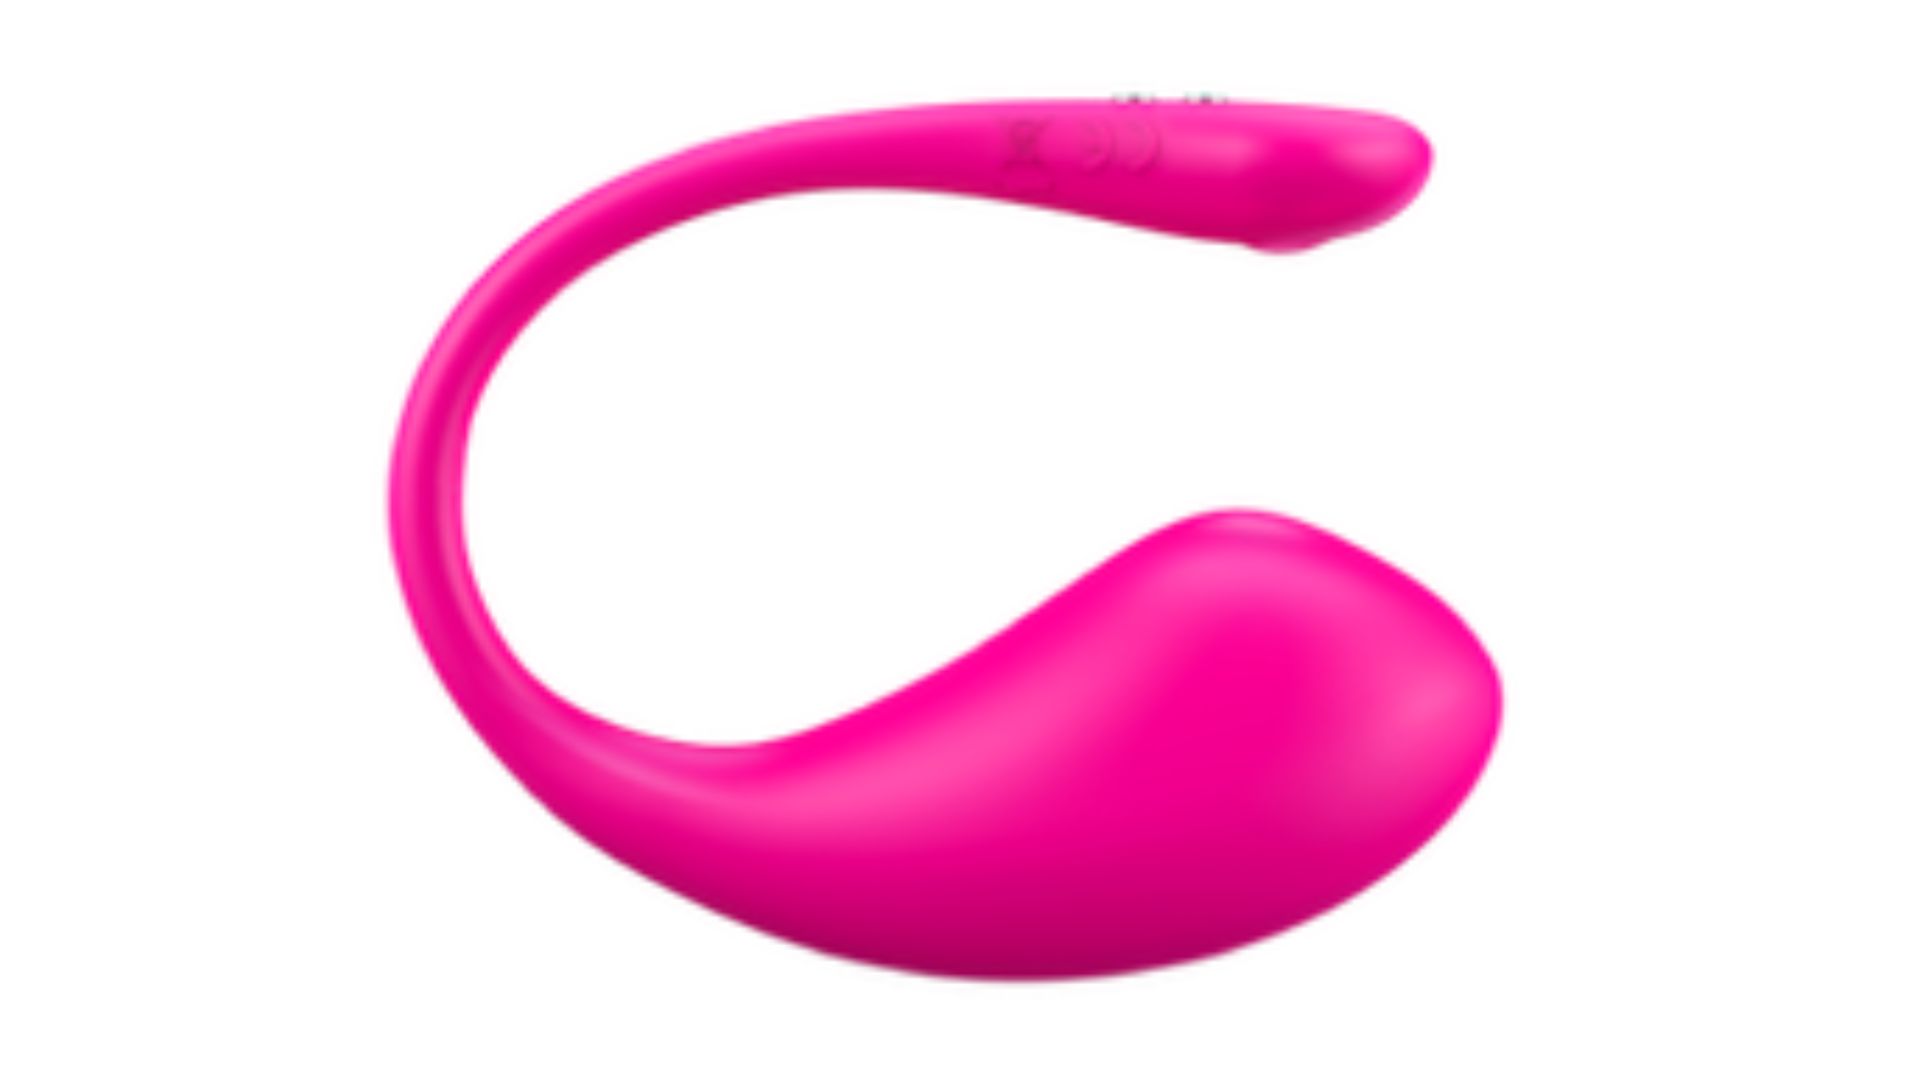 ‘This thing is AMAZING’ rave fans of Lovense bestselling app-controlled Lush 3 sex toy now 50% off for sale